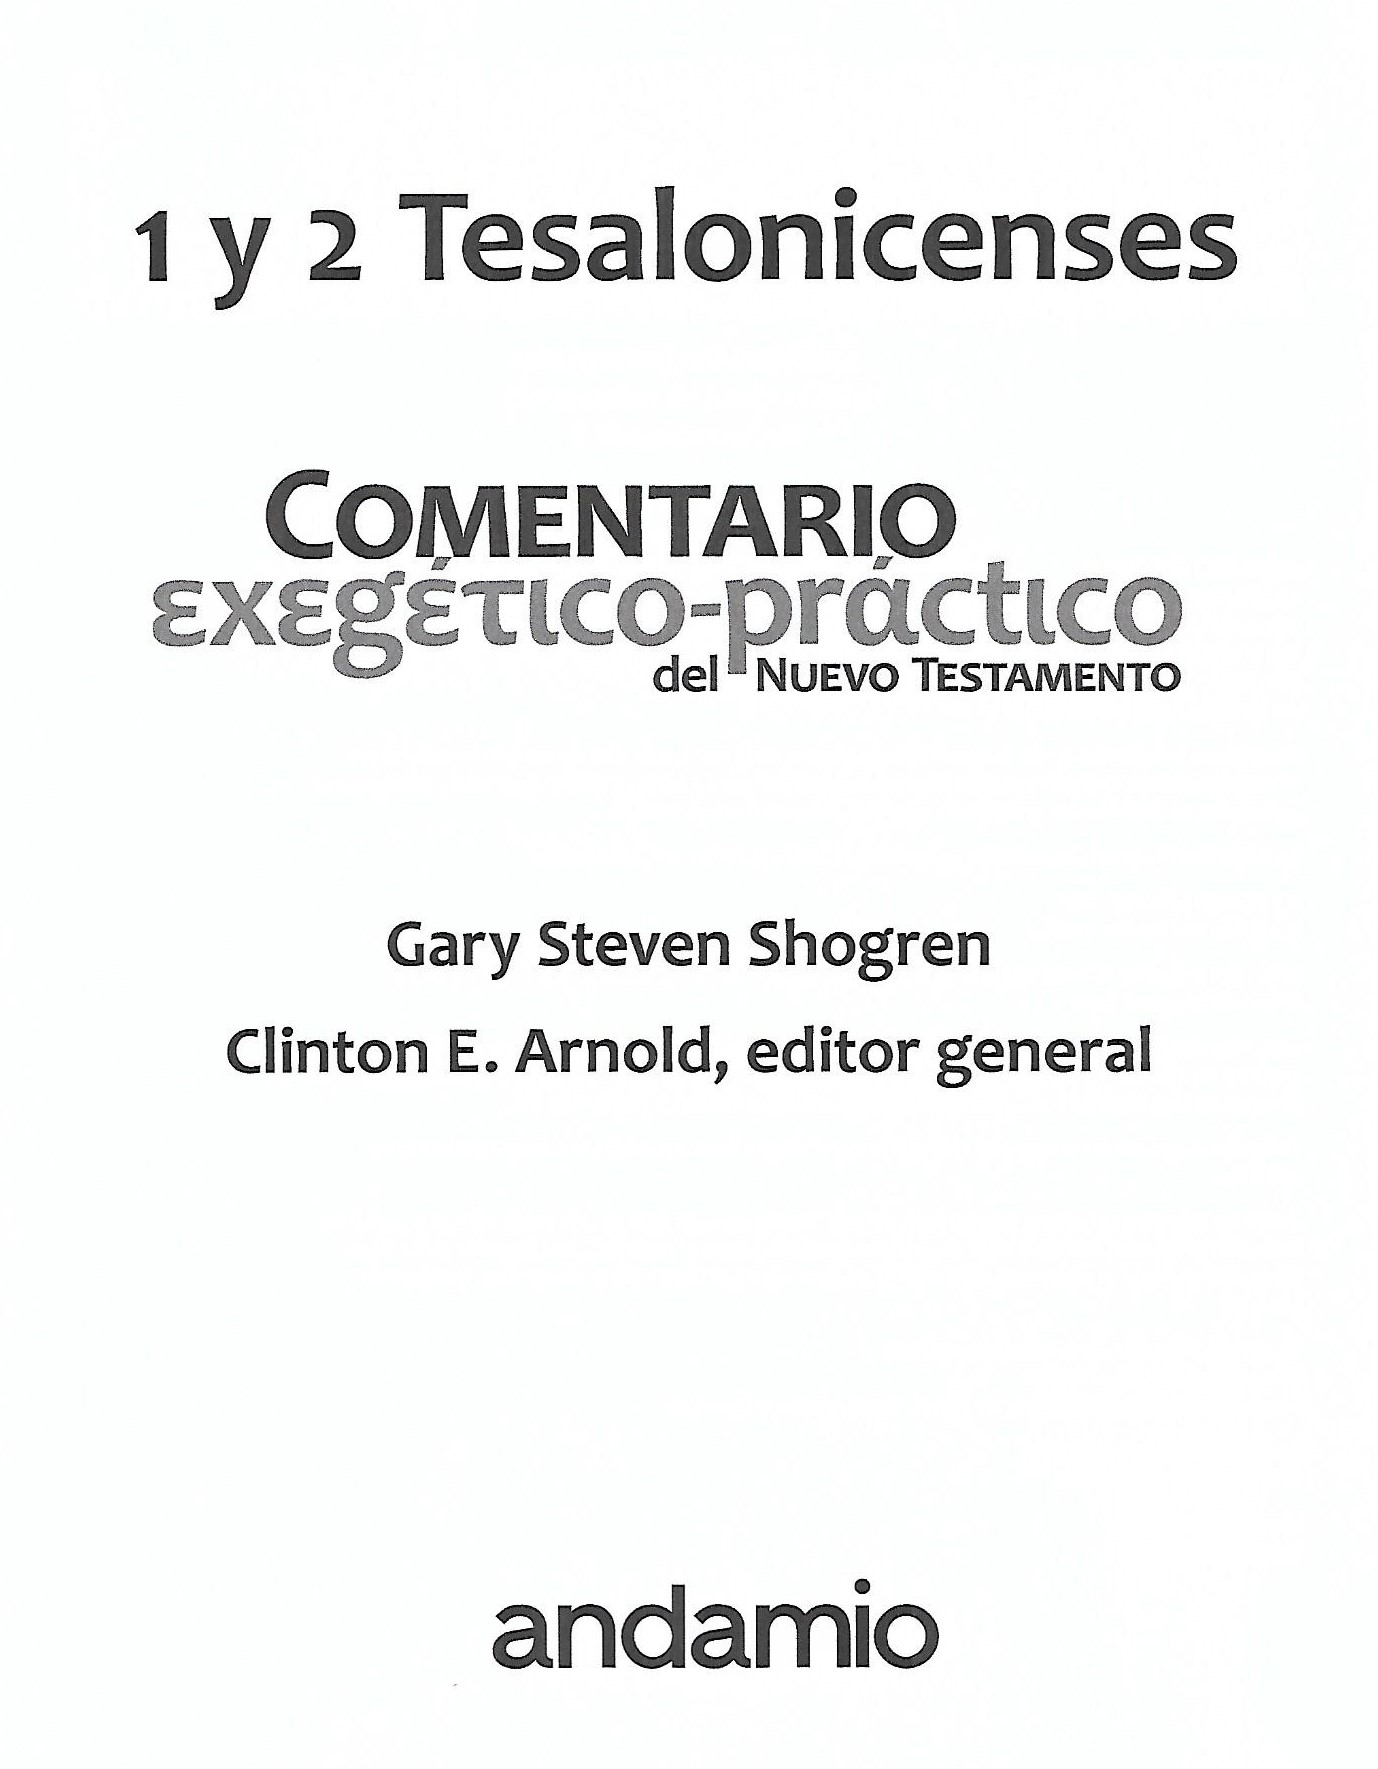 Title page Tesalonicenses